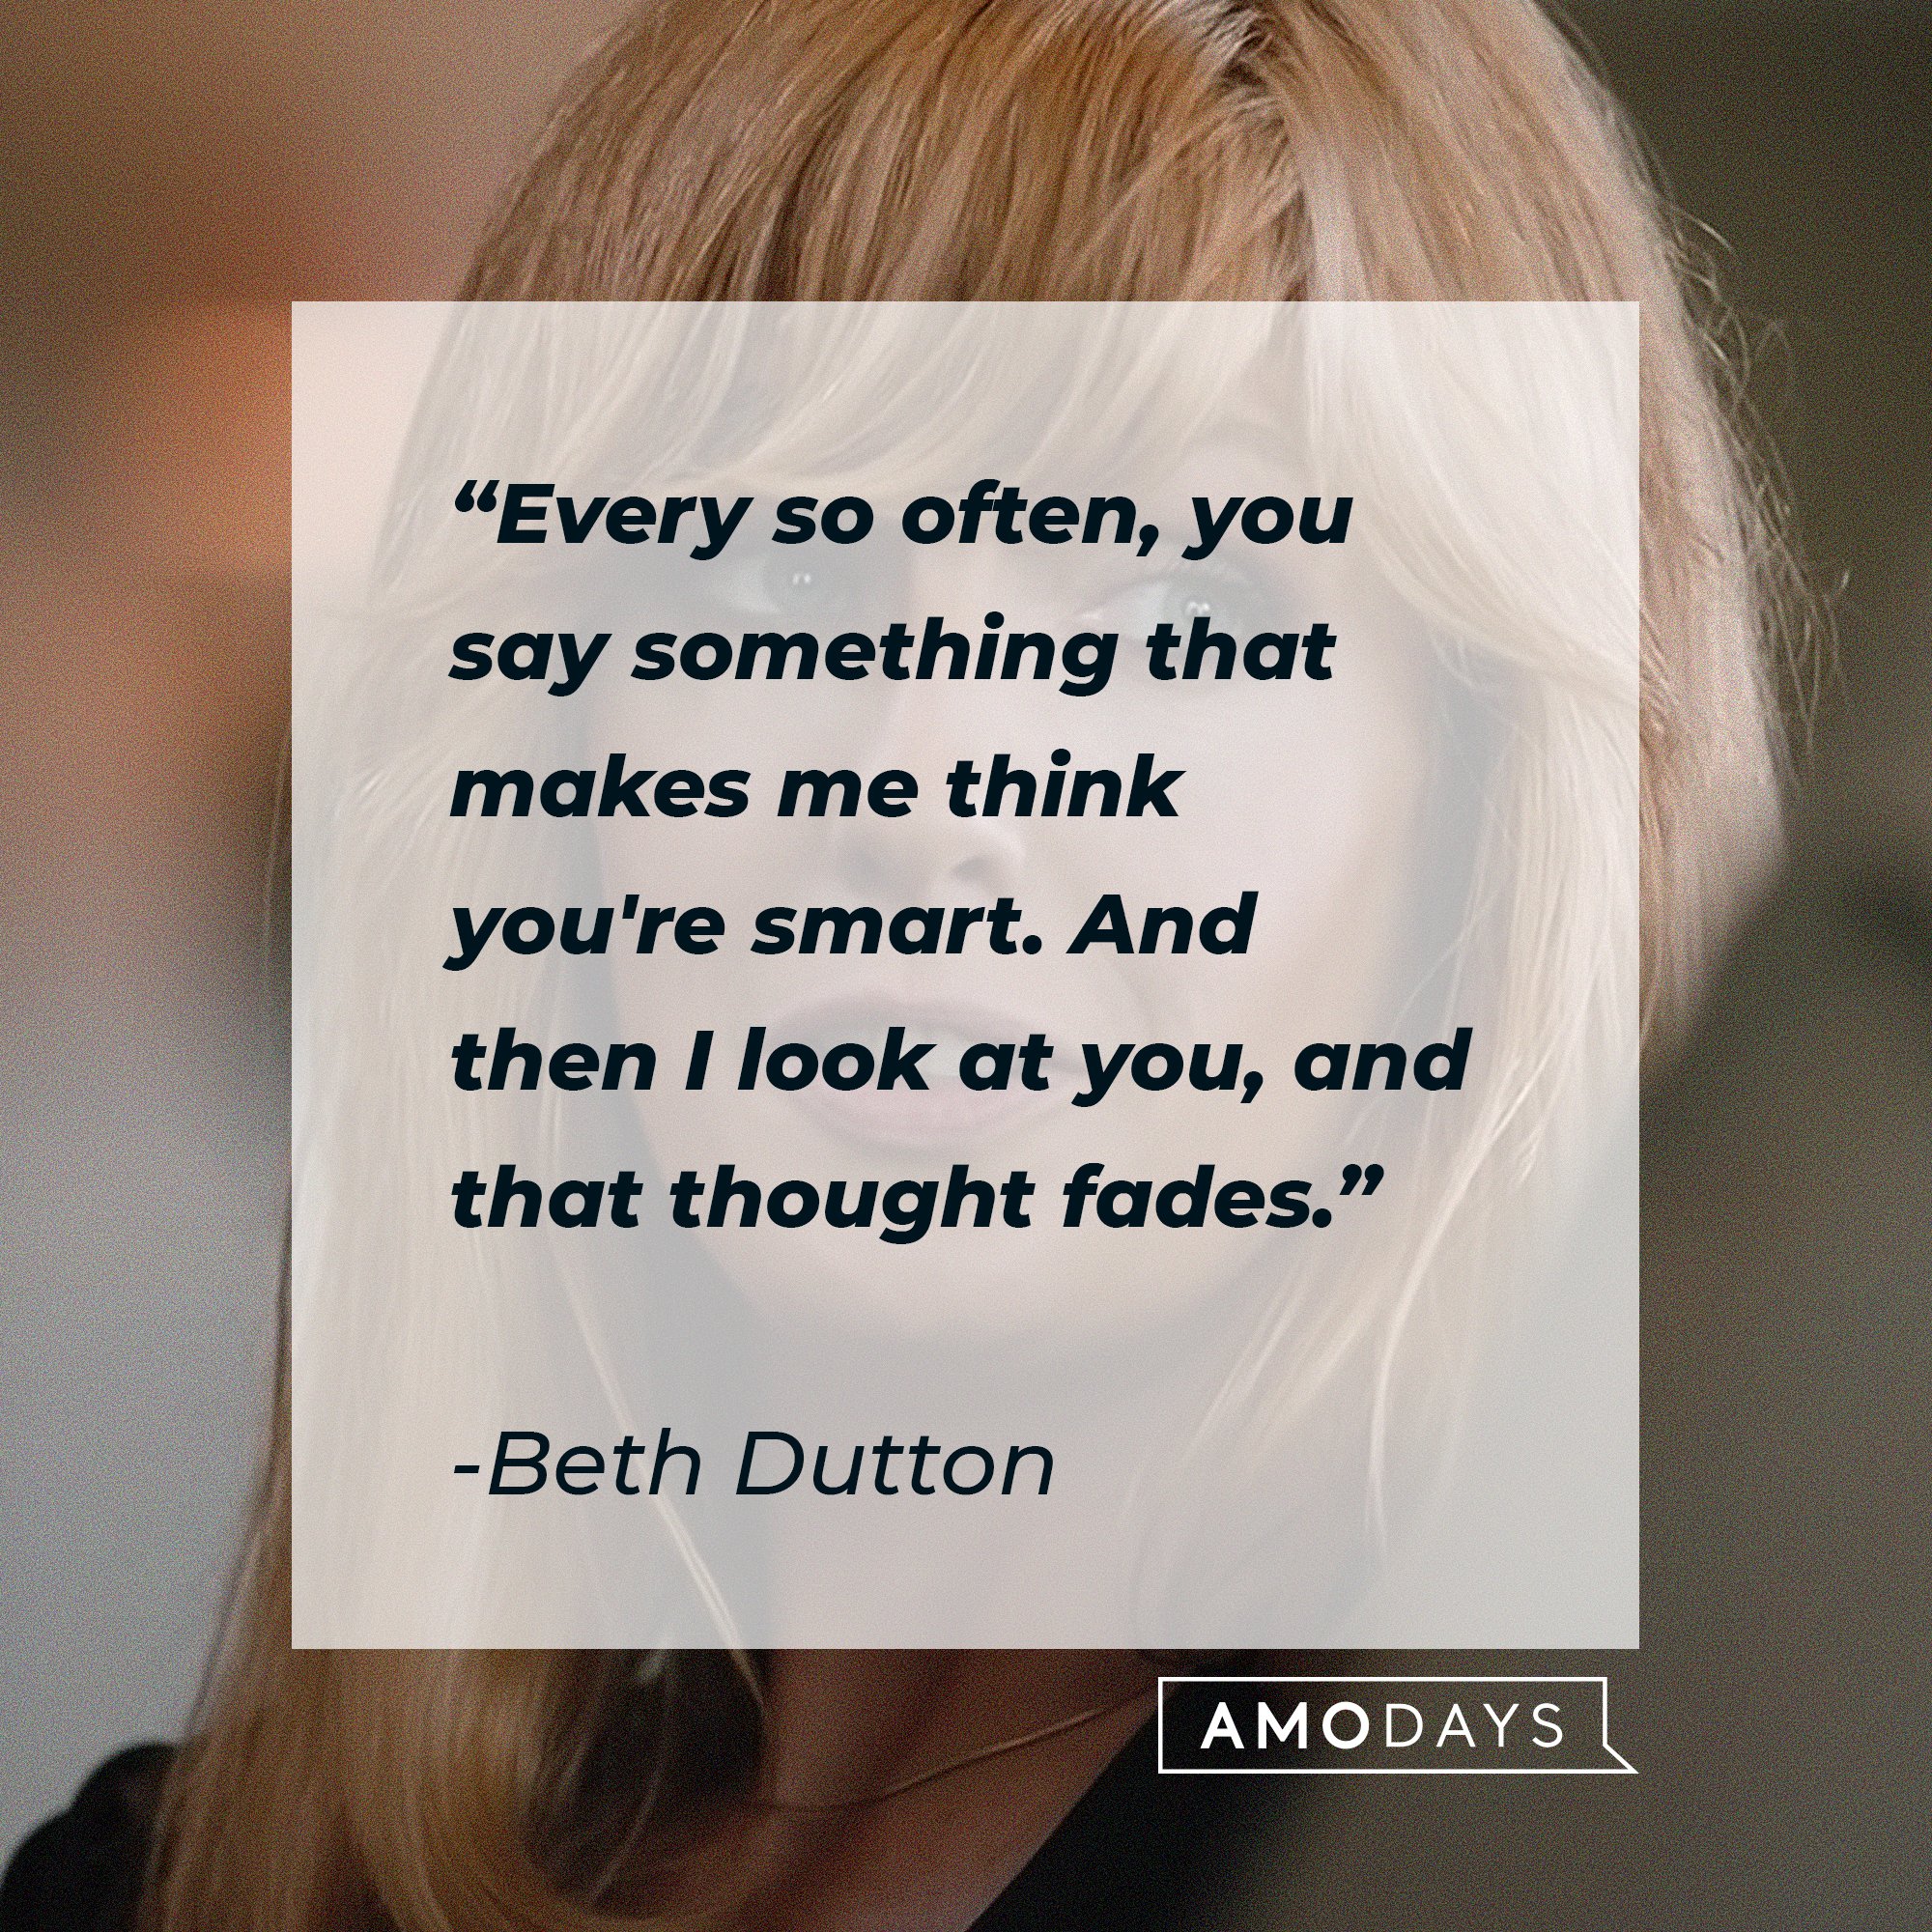  Beth Dutton's quote: "Every so often, you say something that makes me think you're smart. And then I look at you, and that thought fades."  | Source: AmoDays